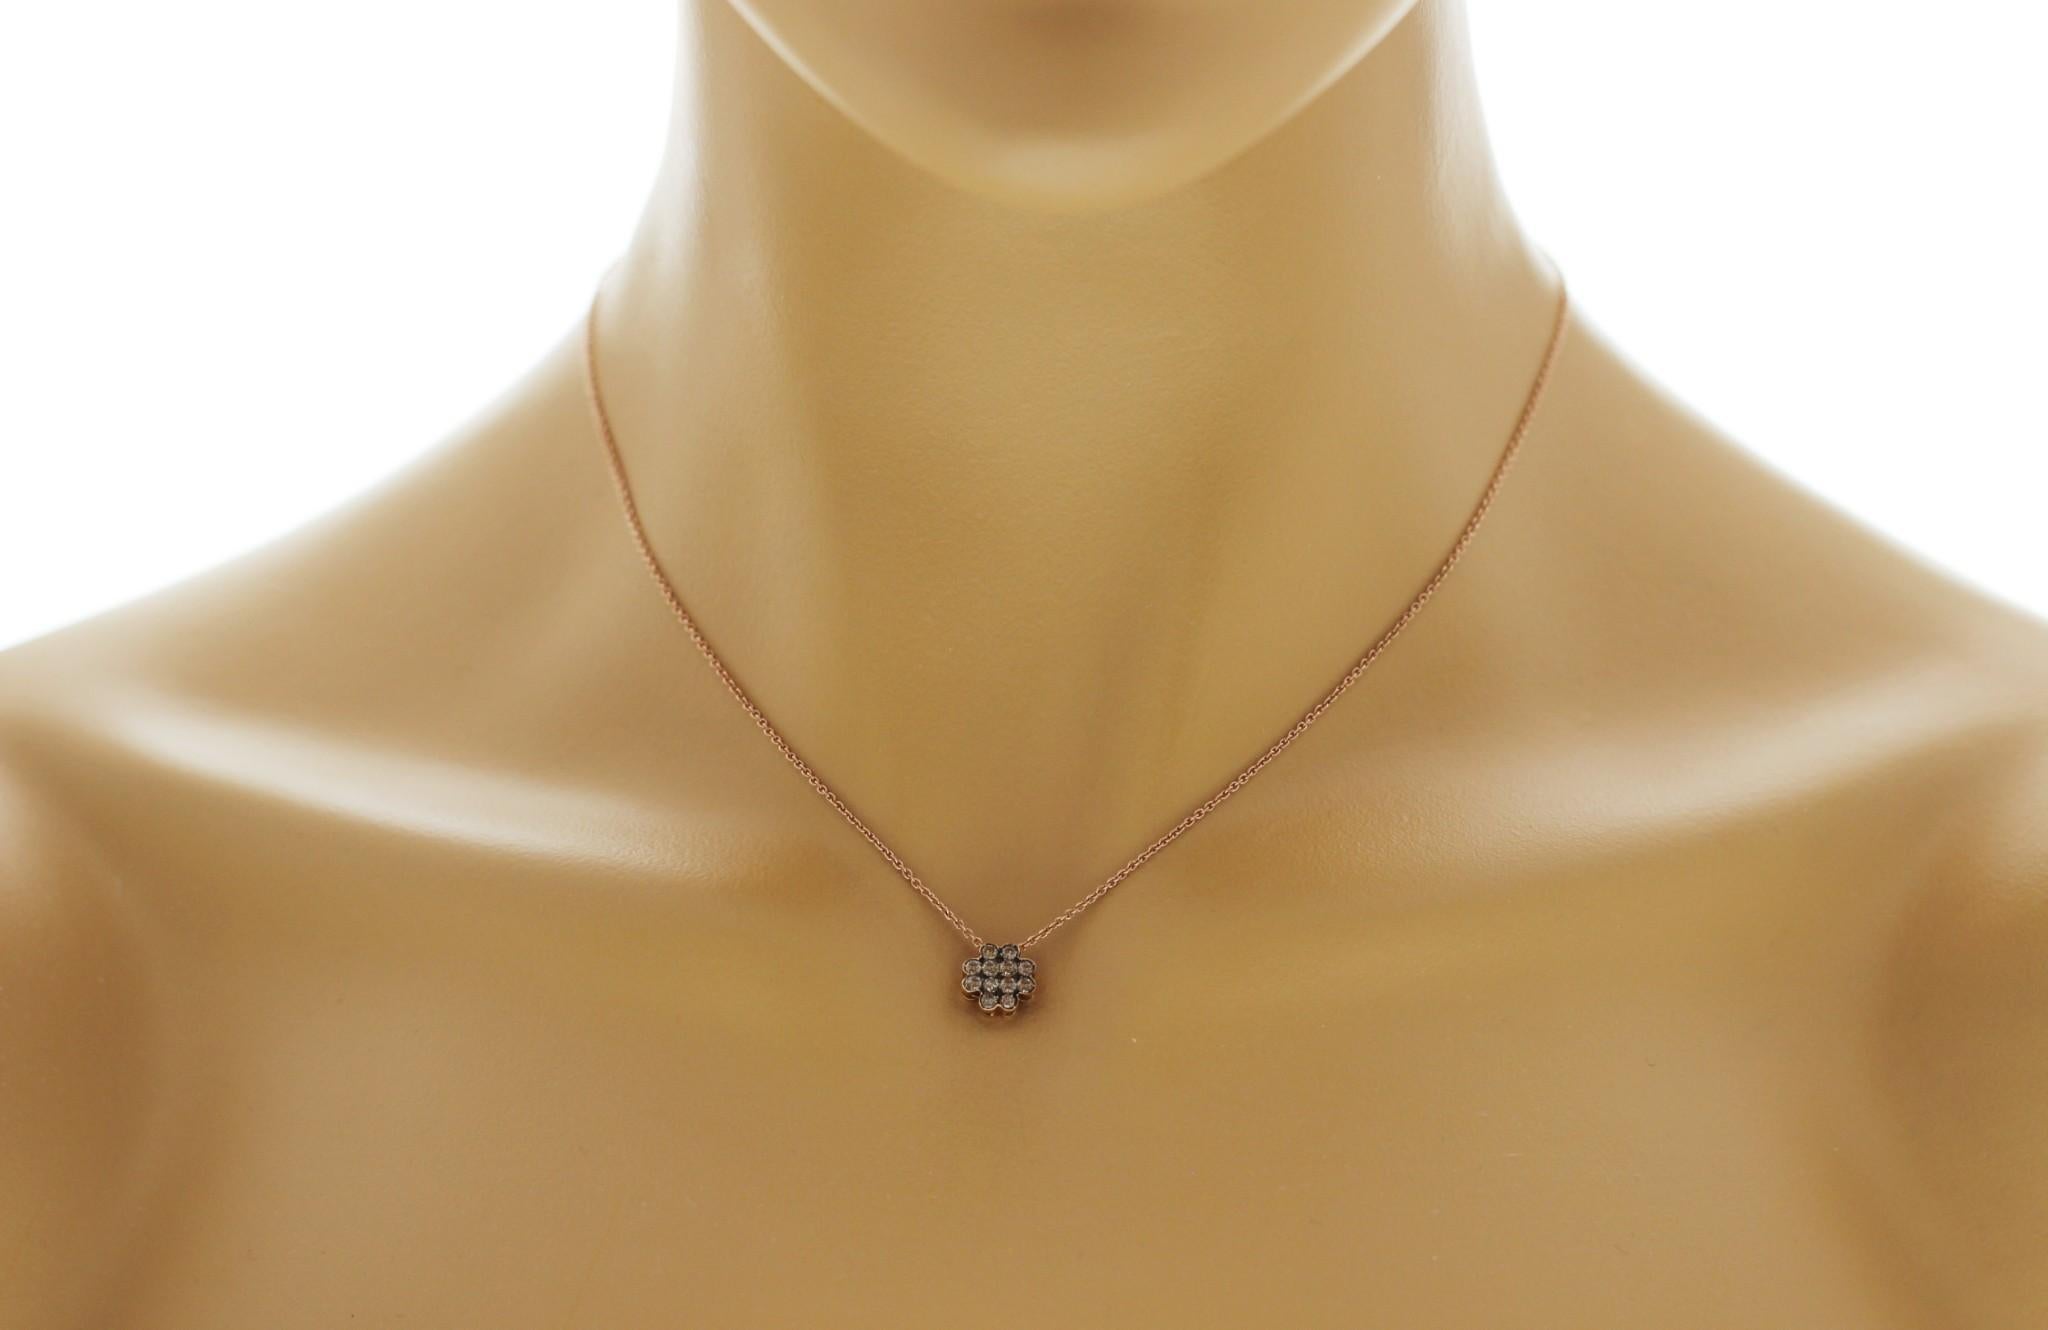 100% Authentic, 100% Customer Satisfaction

Pendant: 9 mm

Chain: 0.5 mm

Size: 16 Inches

Metal: 18K Rose Gold

Hallmarks: 18K

Total Weight: 3 Grams

Stone Type: Brown Diamonds

Condition: New

Estimated Price: $1660

Stock Number: N29